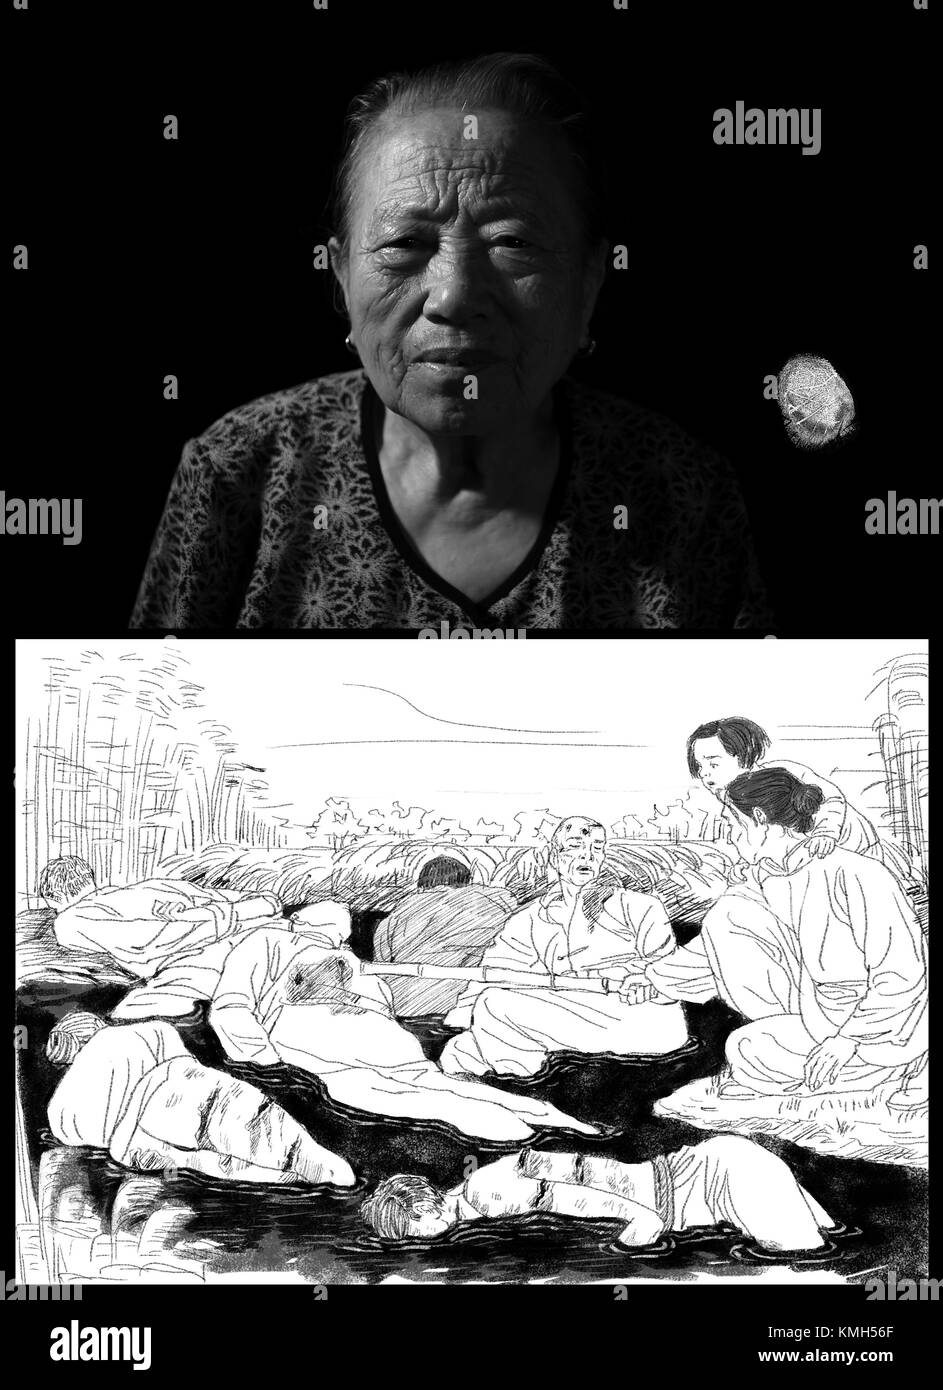 Nanjing, China. 10th Dec, 2017. (171210) -- NANJING, Dec. 10, 2017 (Xinhua) -- The combo picture shows the portrait, fingerprint of Shi Xiuying and illustrated story reviving her tragedy based on facts.  Born on Oct. 26, 1926, Shi is a survivor of Nanjing Massacre, a heinous crime committed by the Japanese militarists during World War II in 1937, in Nanjing, then capital of China.  In the winter of 1937, Shi found the body of his father in a pile of corpses slaughtered by Japanese invaders. Her eldest brother Shi Kunbao was forced onto a Japanese military truck and gone forever. The year 2017  Stock Photo